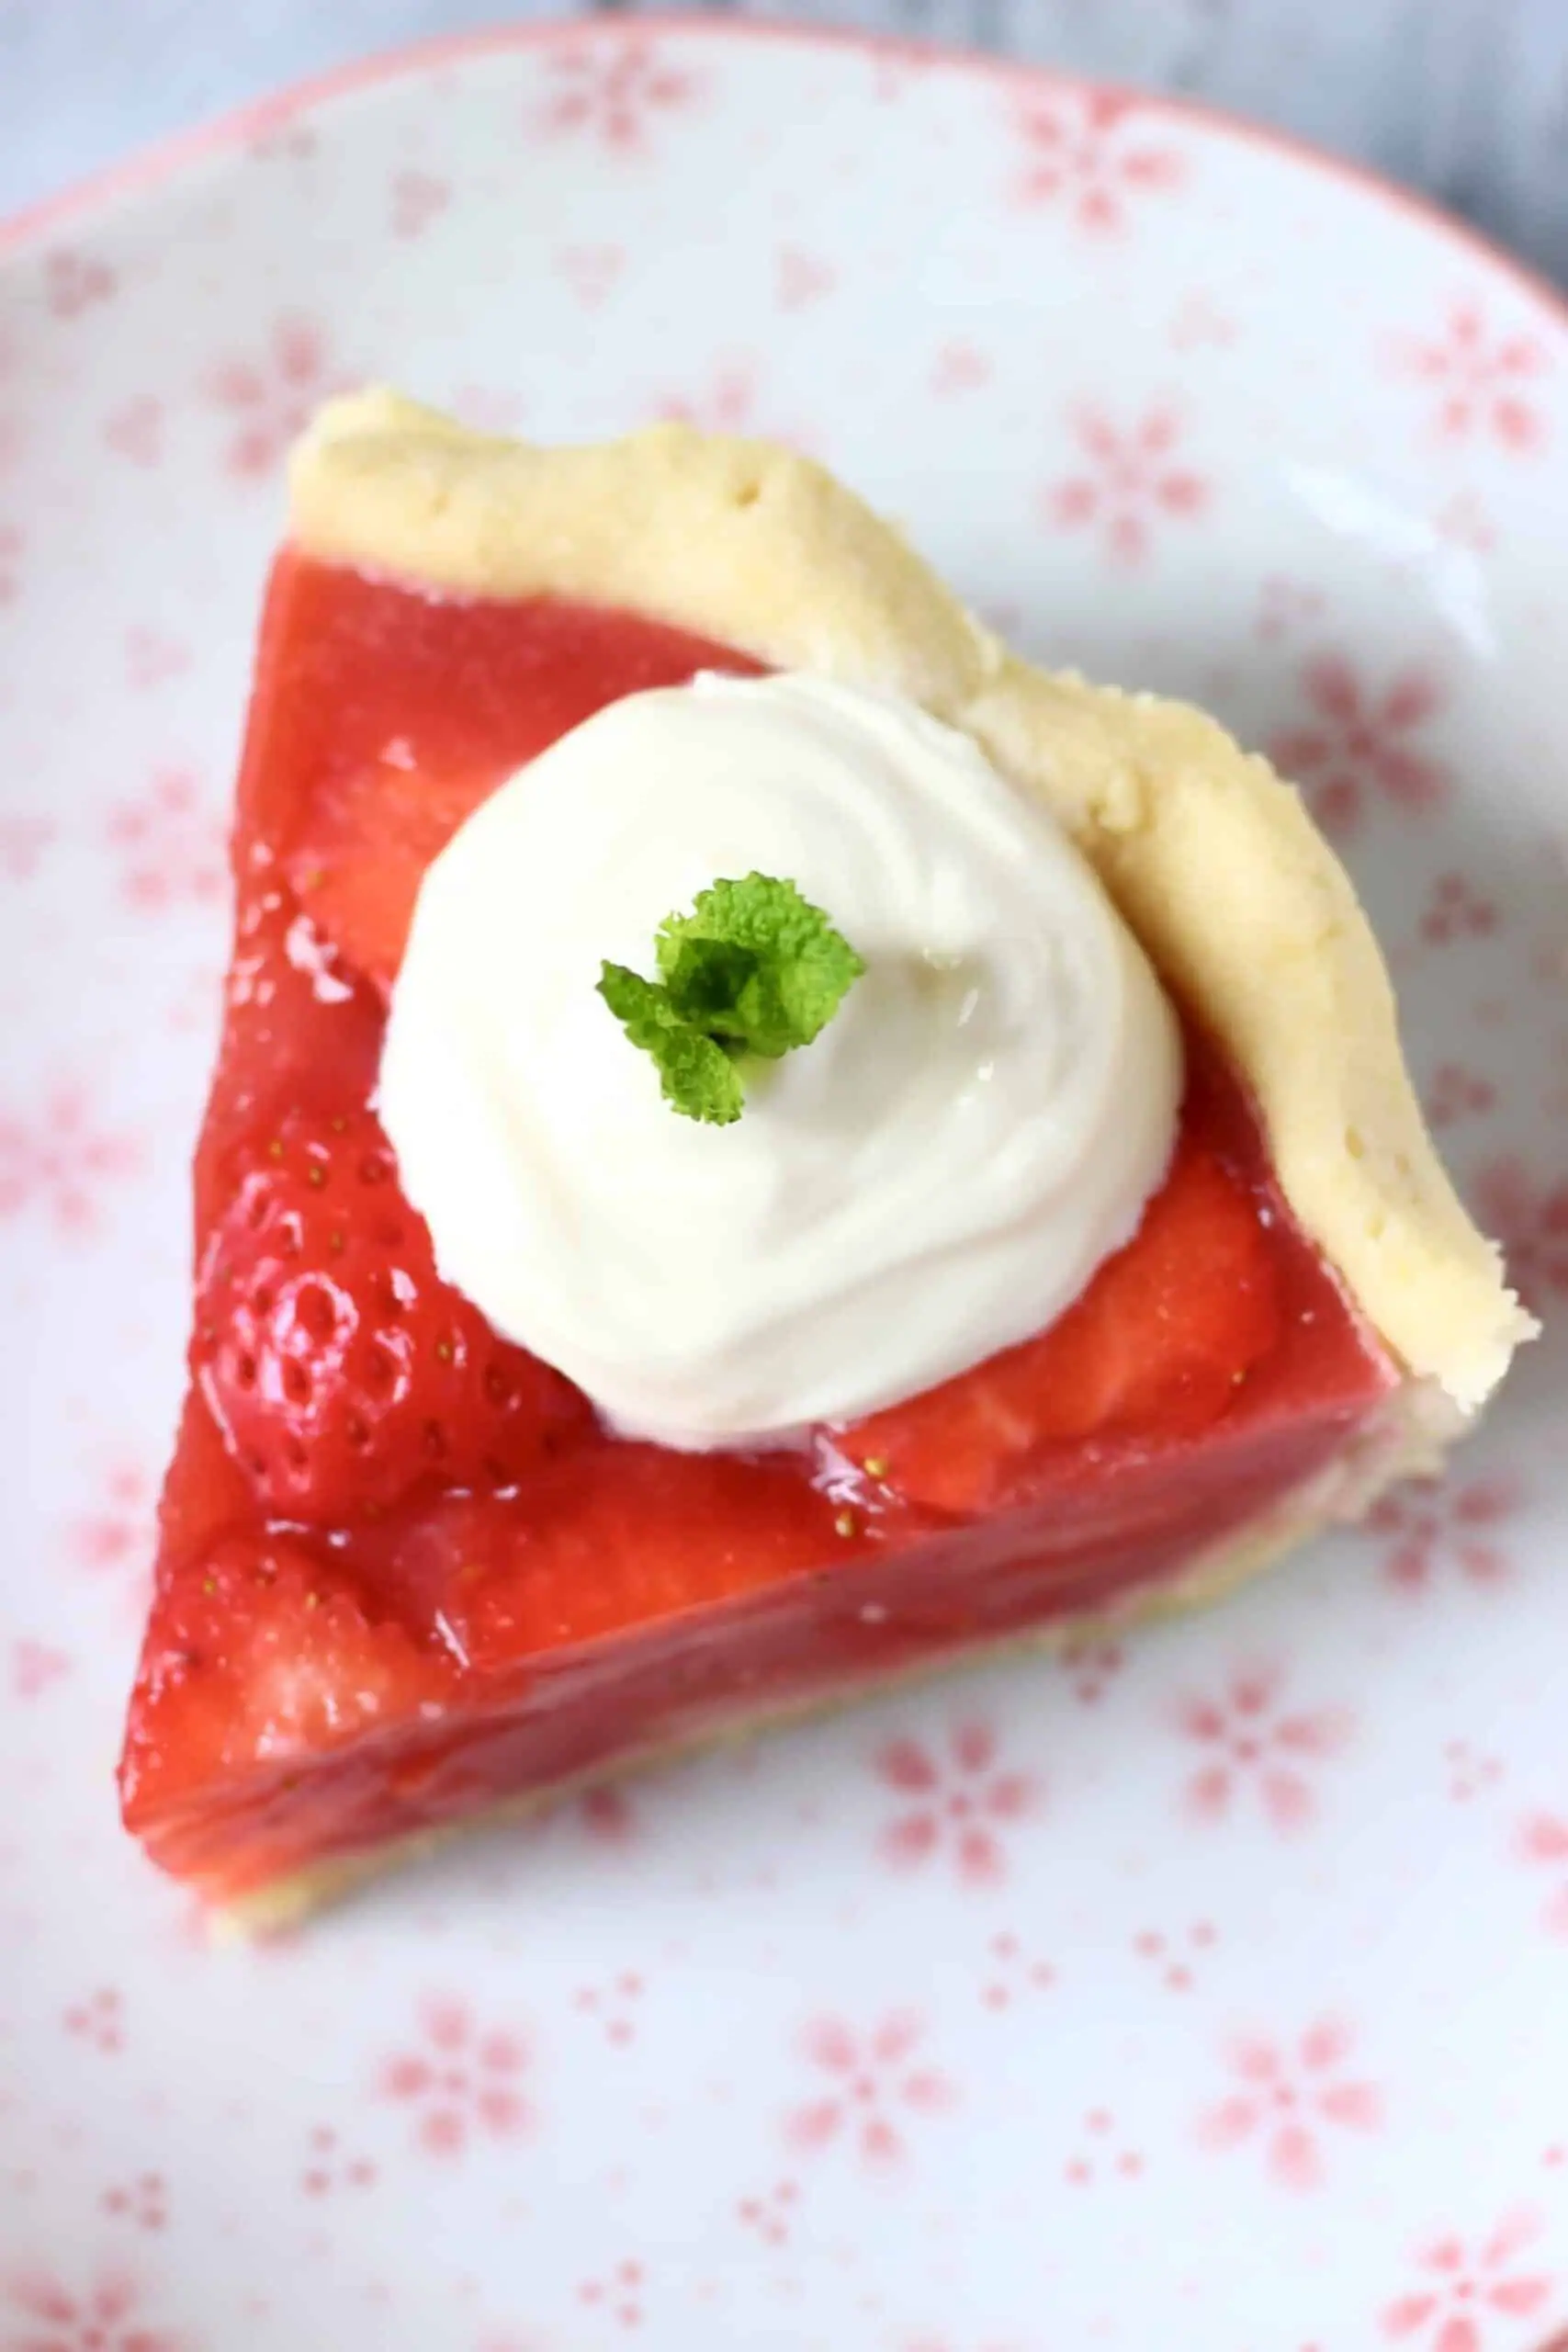 Photo of a slice of strawberry pie topped with cream and a sprig of mint against a white plate with pink flowers